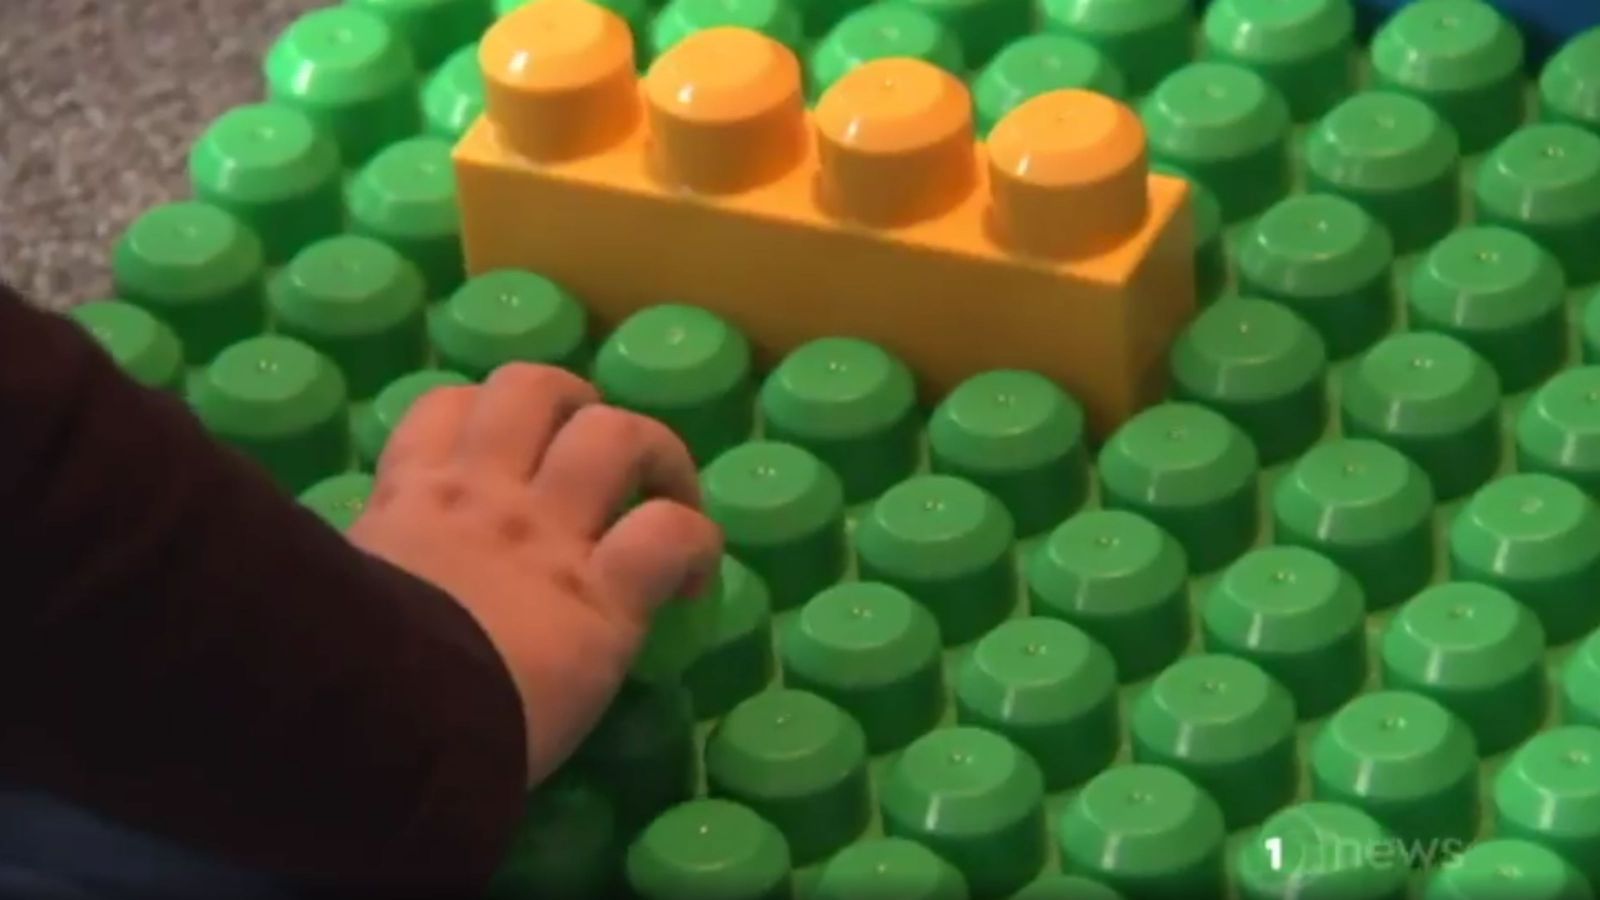 A child’s hand by a large yellow block secured on a large green block surface.